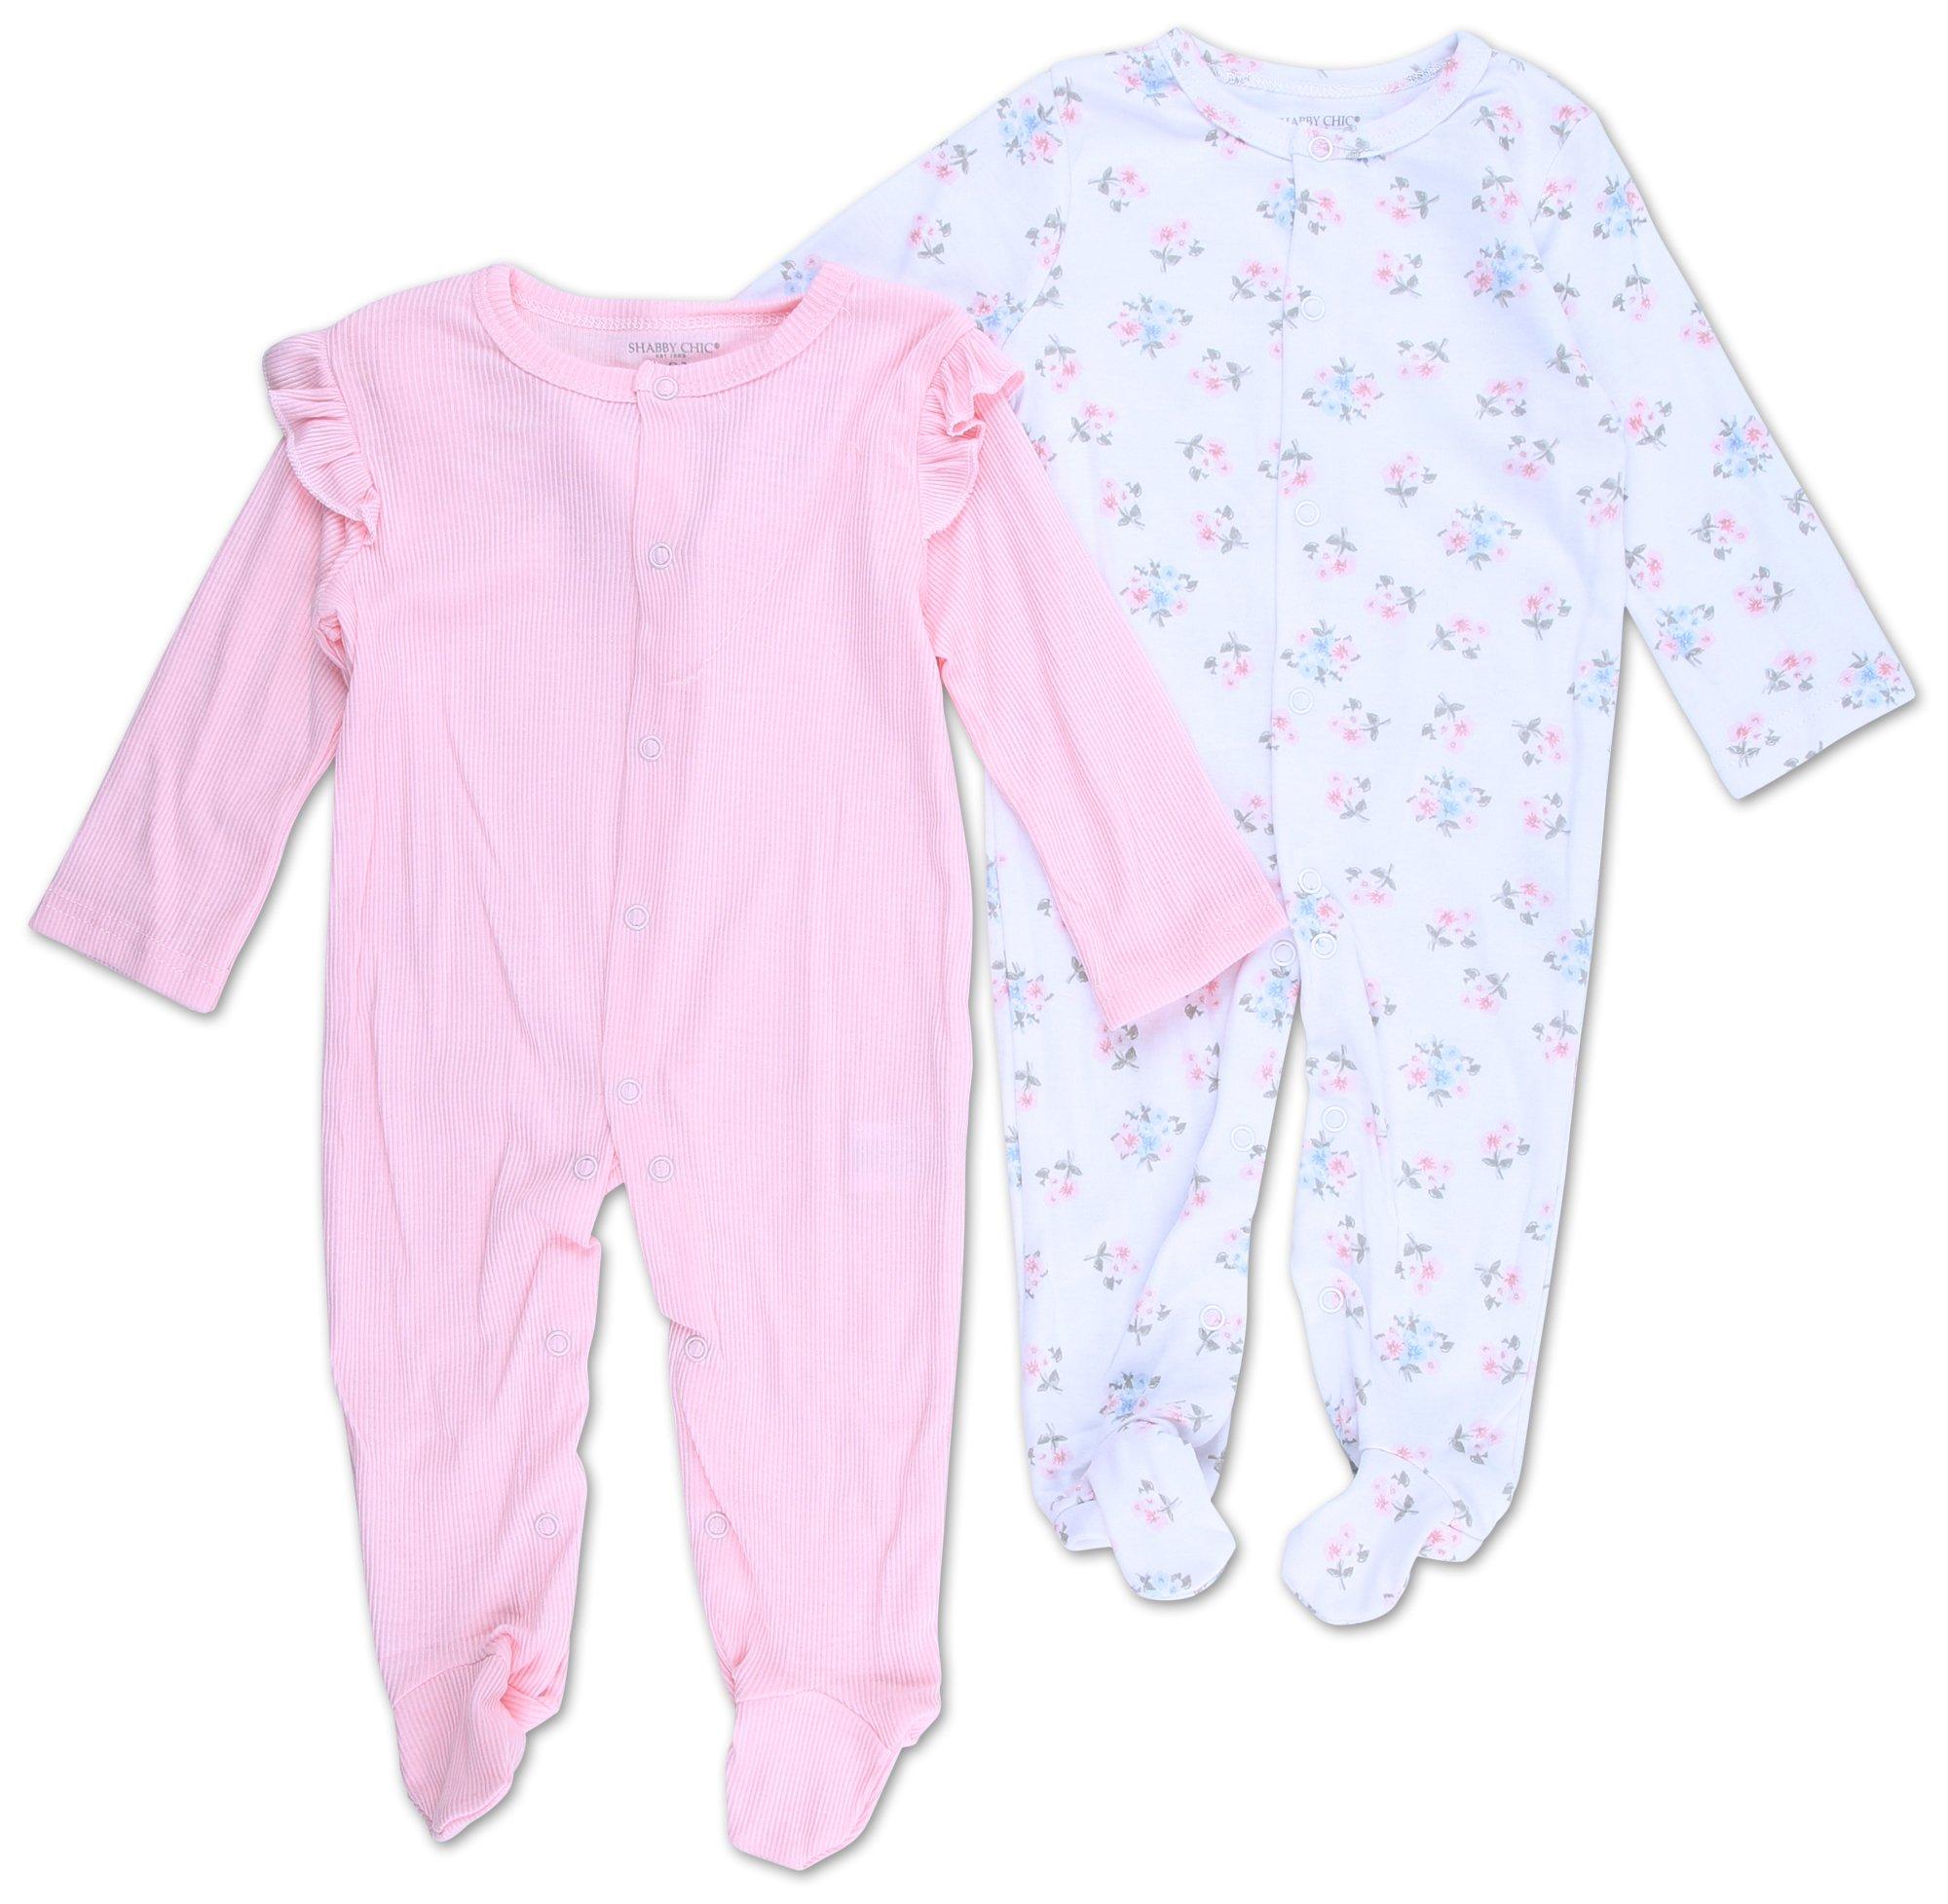 Baby Girls 2 Pk Footed Sleepers